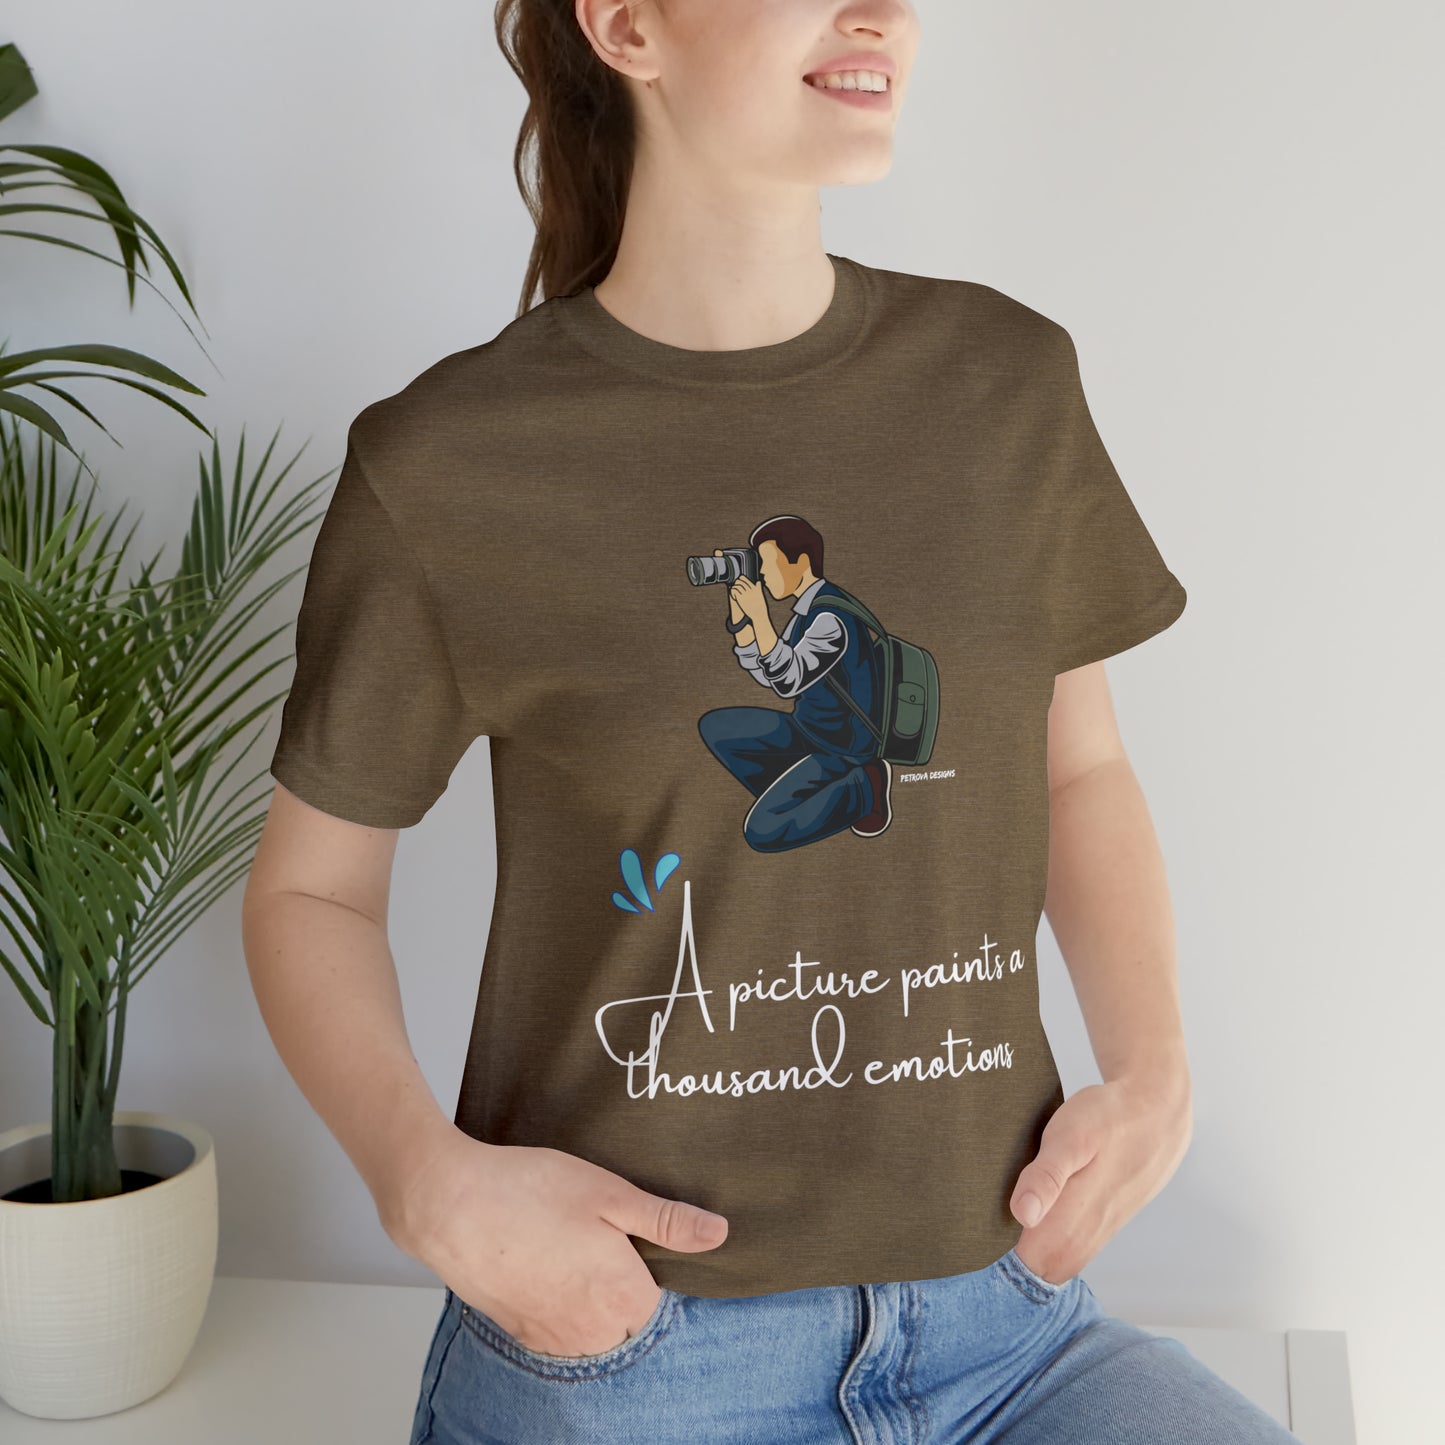 Heather Olive T-Shirt Tshirt Design Gift for Friend and Family Short Sleeved Shirt Petrova Designs